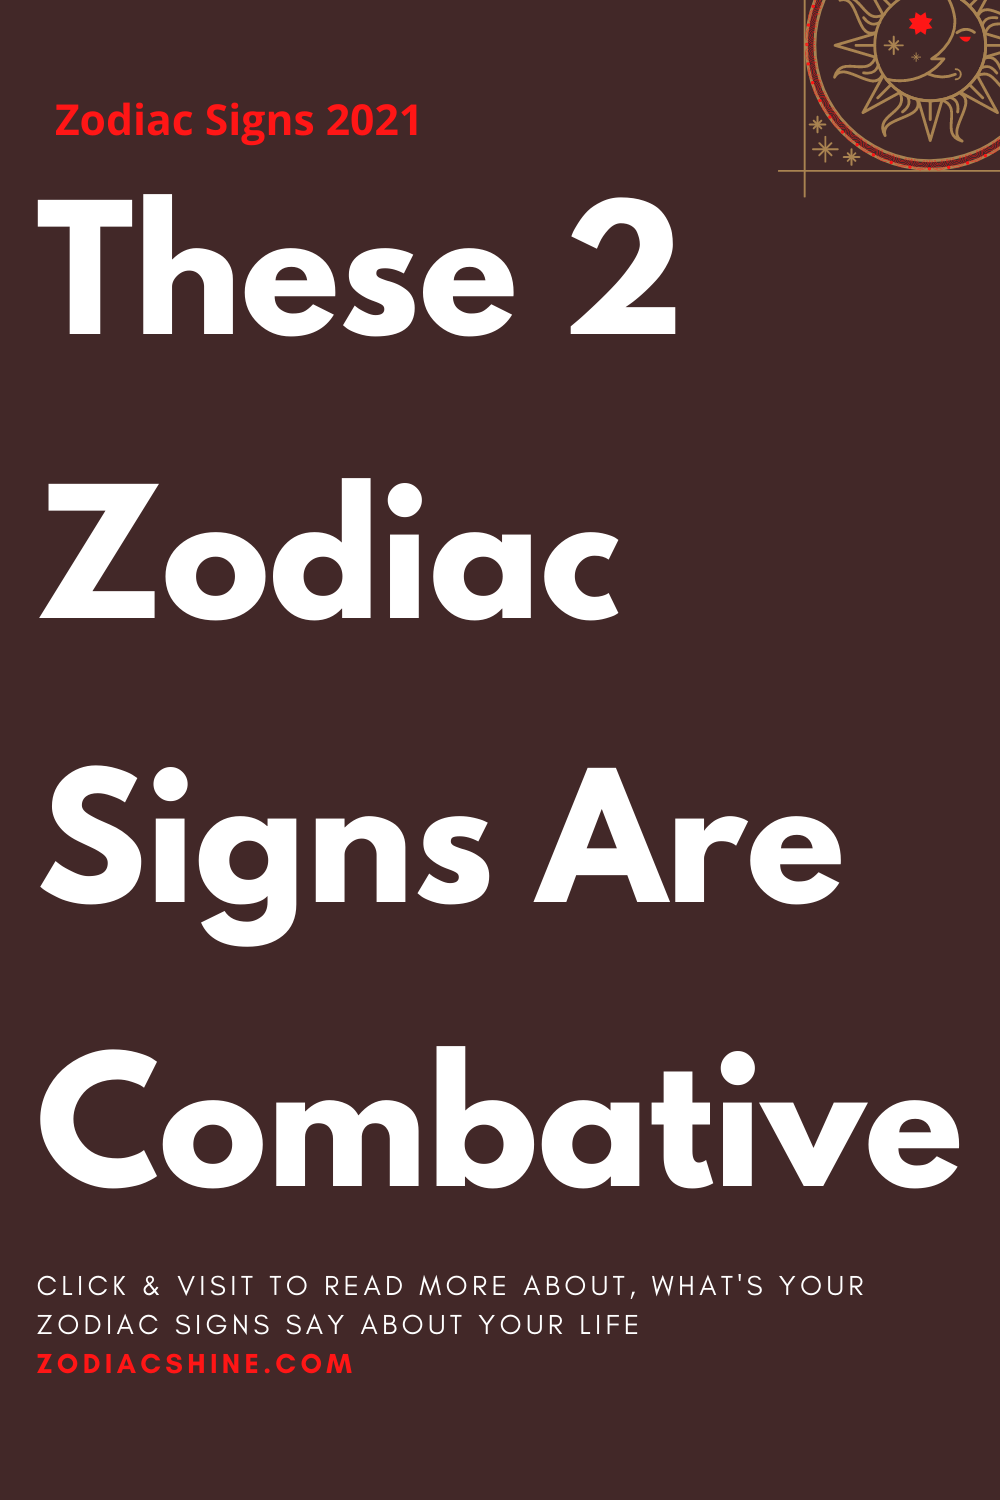 These 2 Zodiac Signs Are Combative